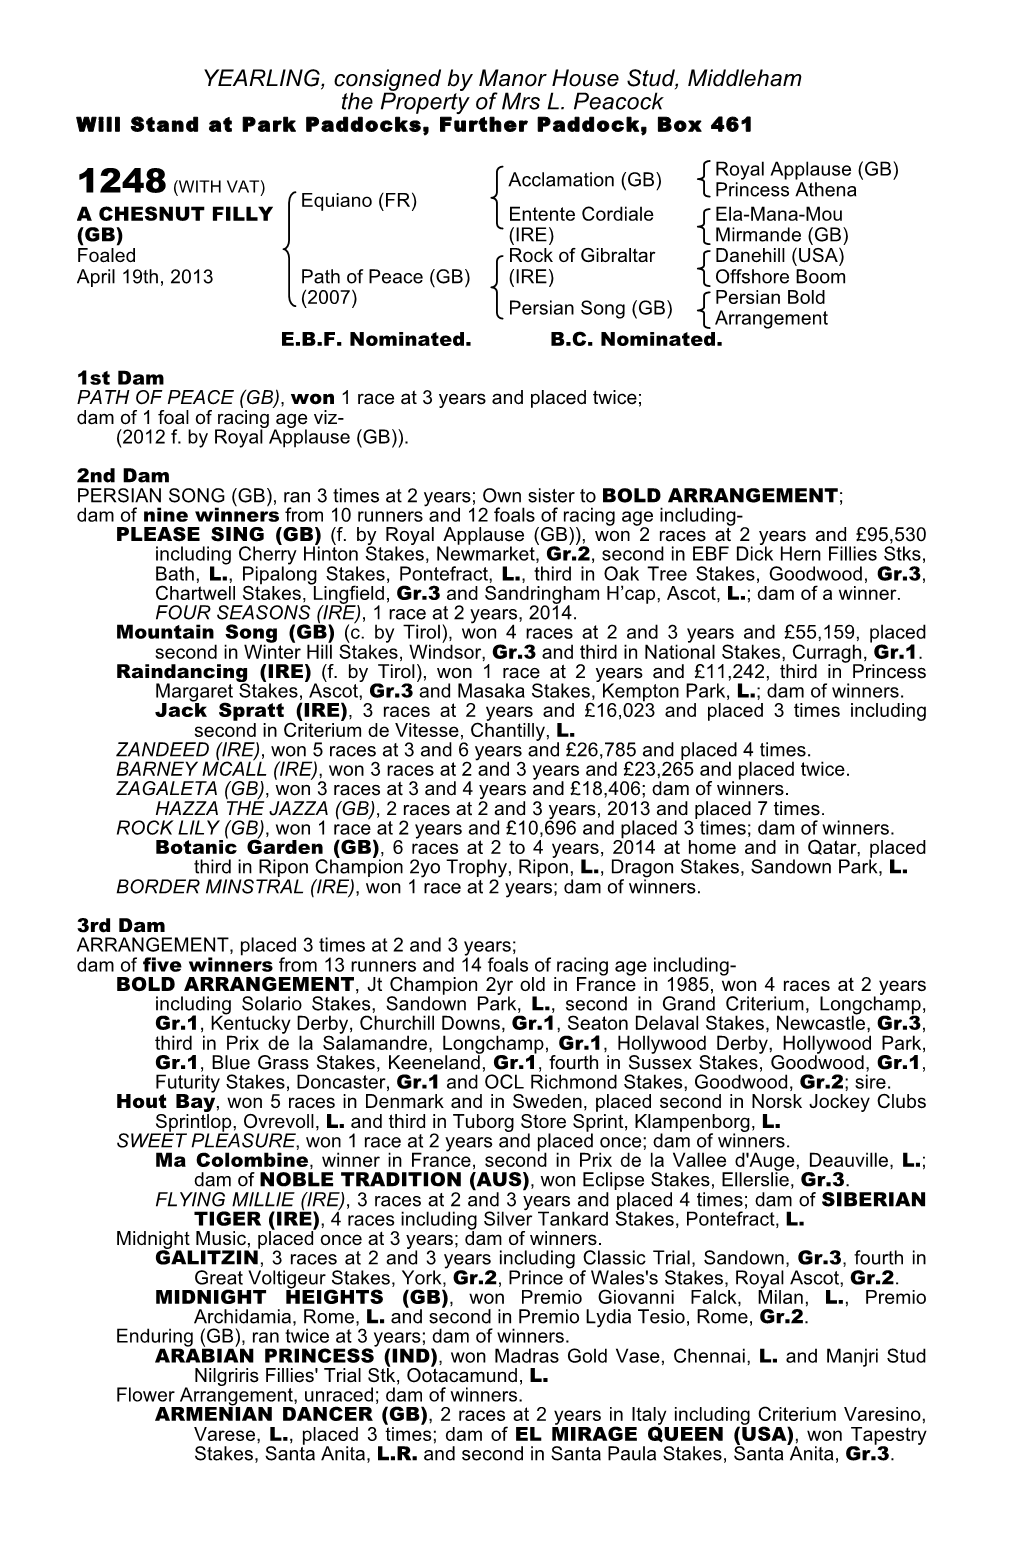 Tattersalls October Yearling Sale Book 1